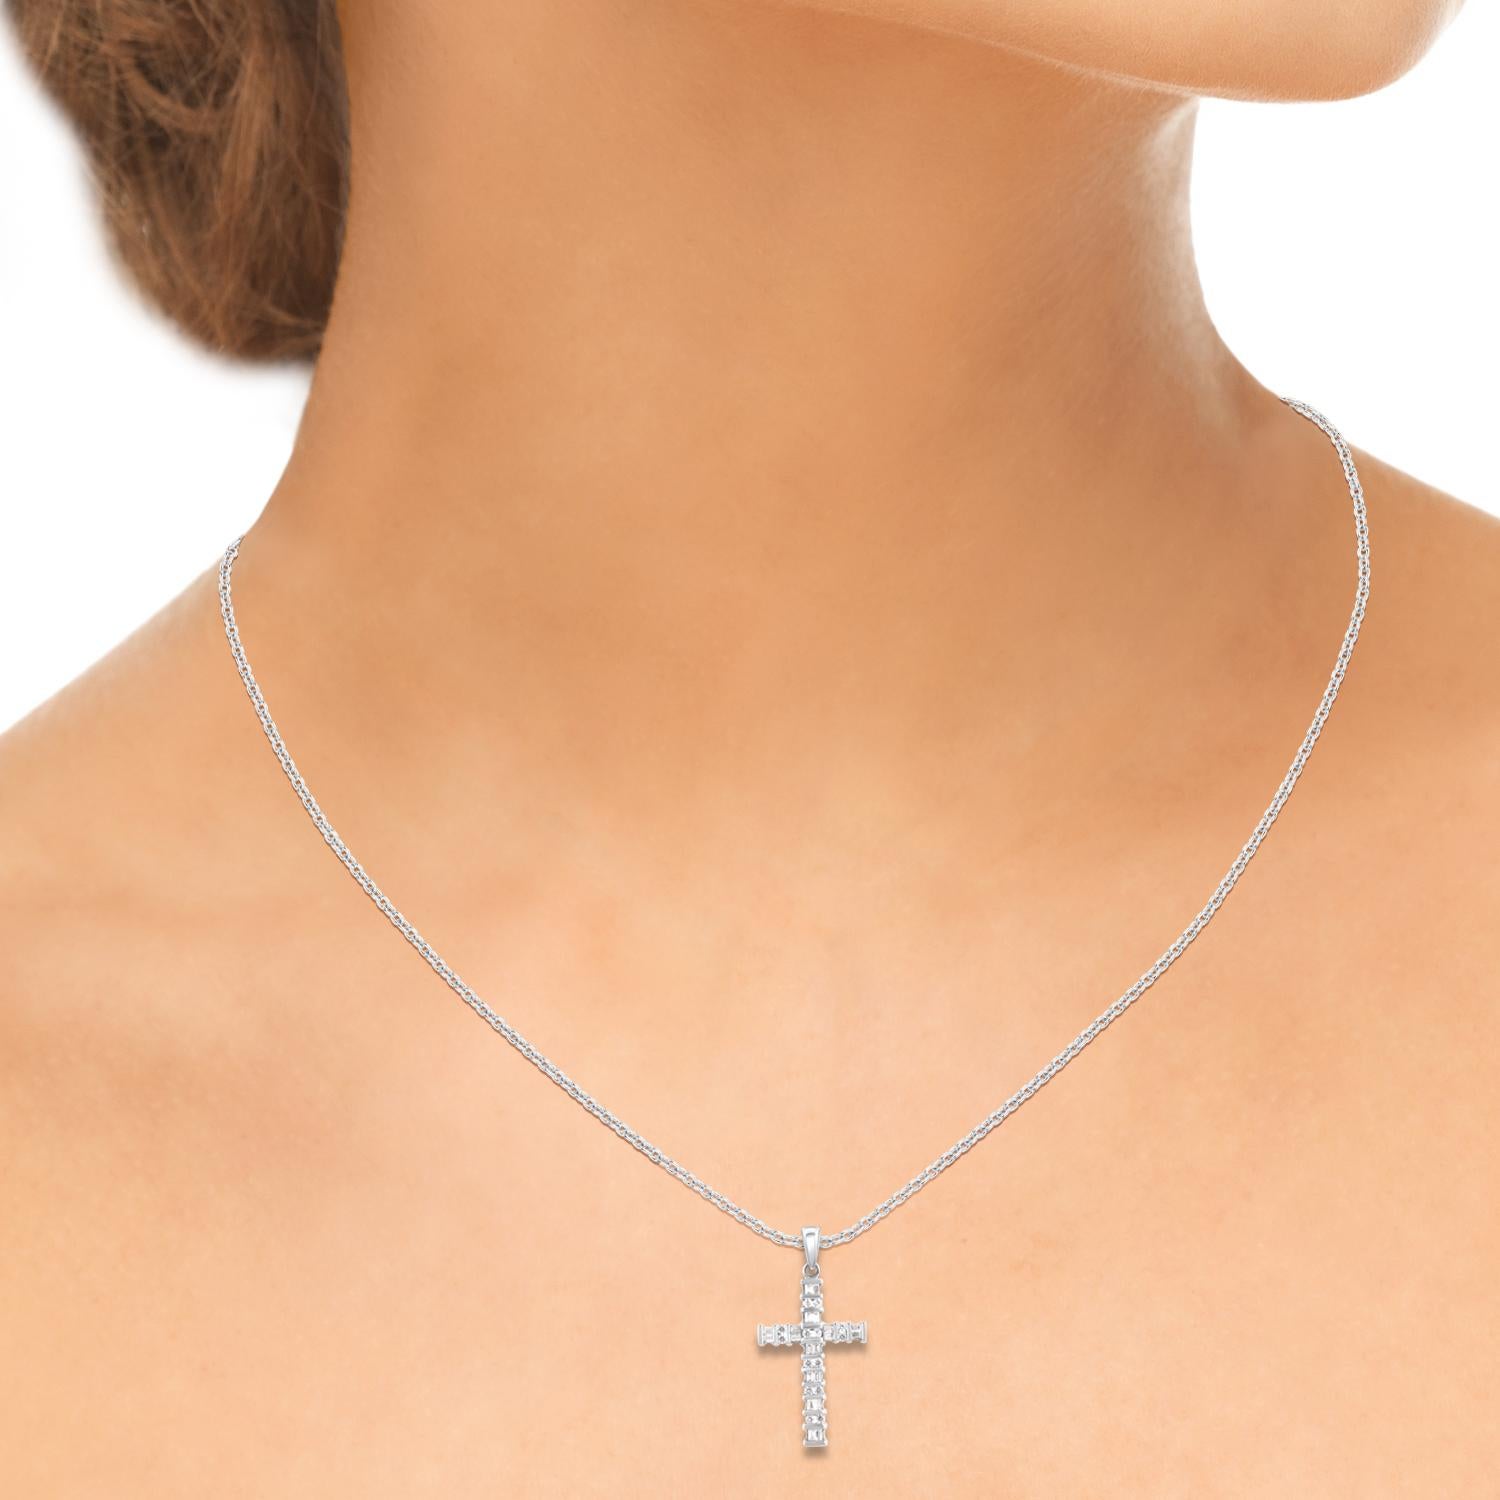 TJD 0.50 Carat Natural Diamond Cross Pendant Necklace in 14 Karat White Gold In New Condition For Sale In New York, NY